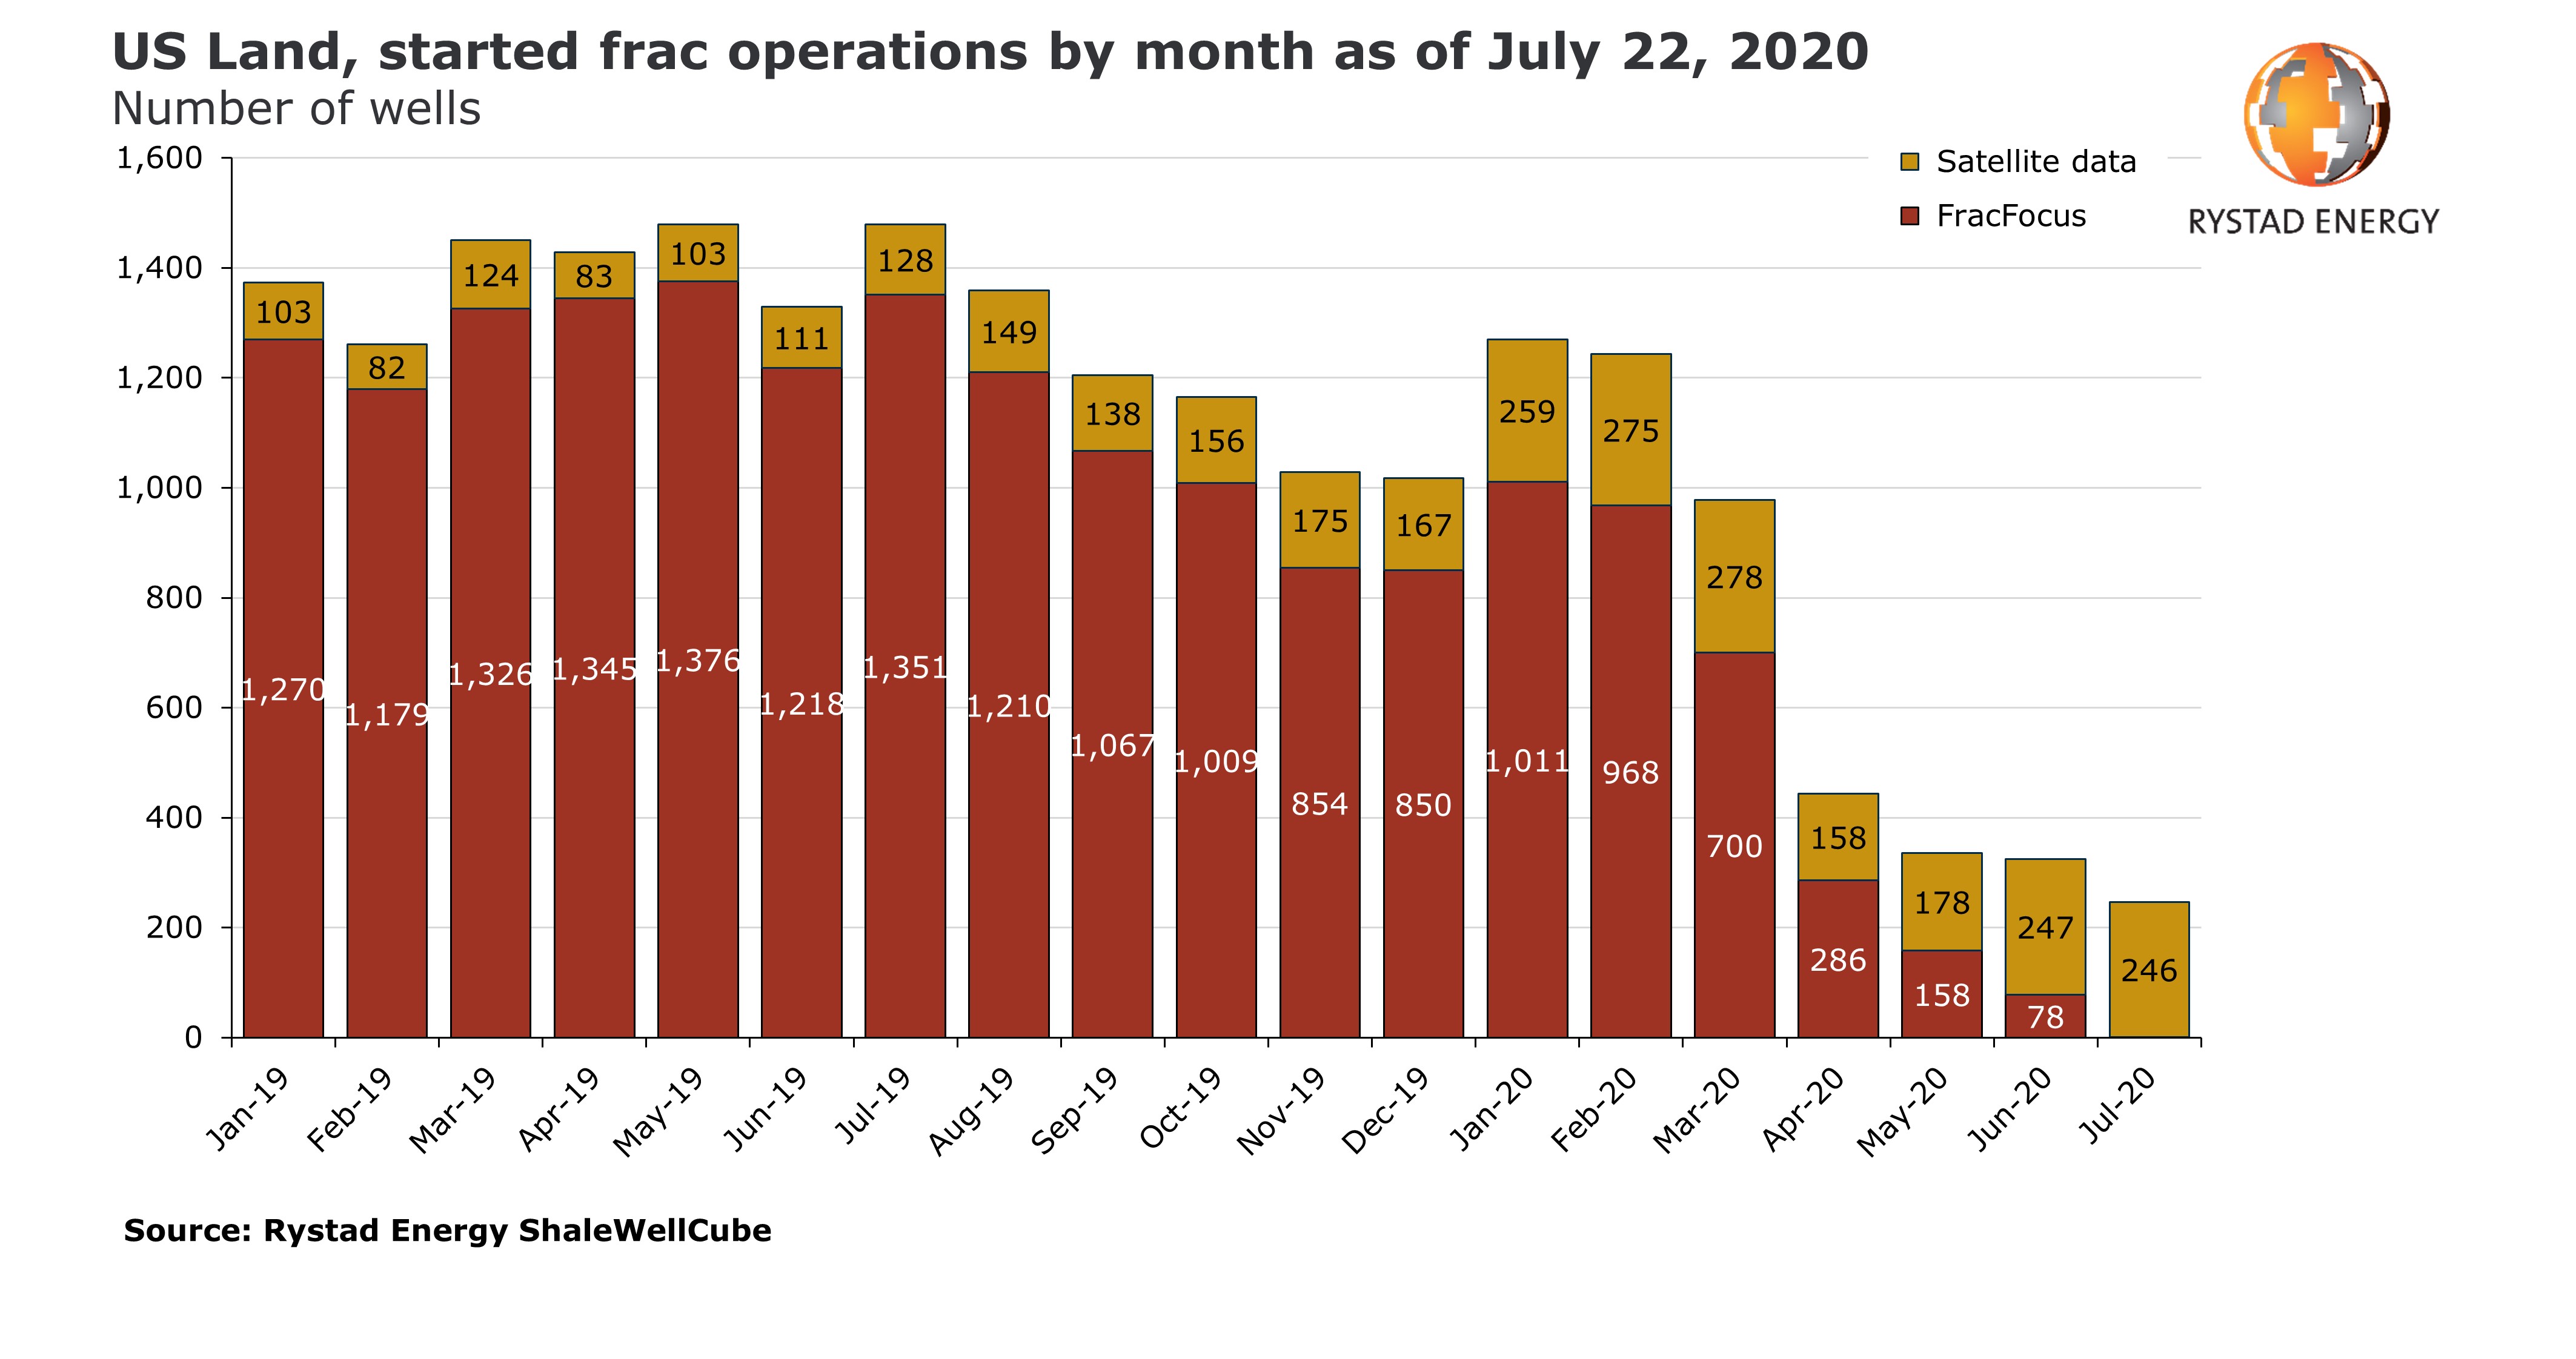 US Land, started frac operations by month as of July 22, 2020